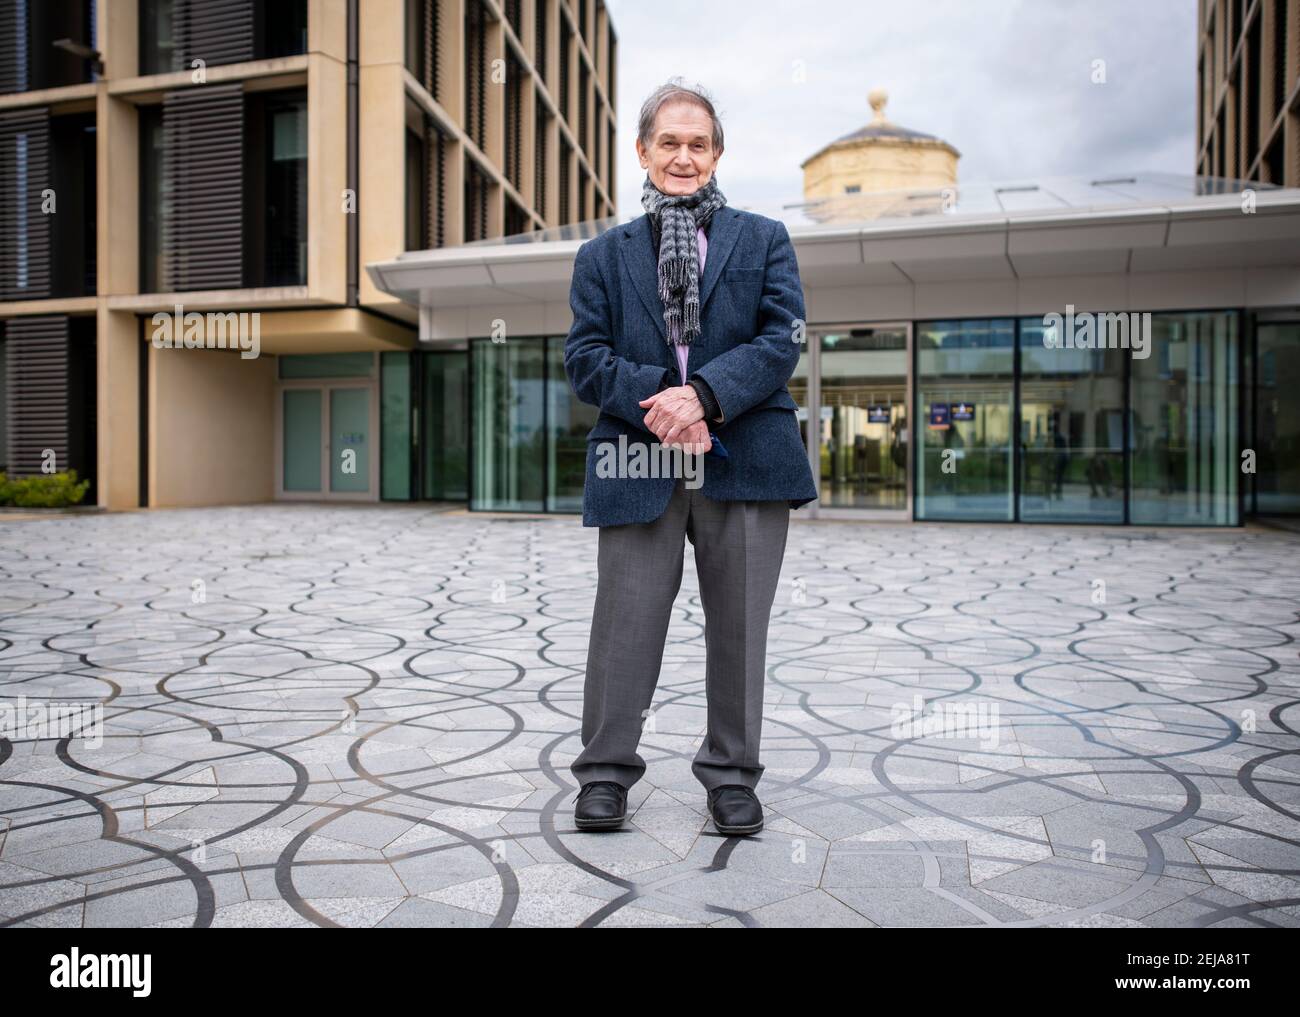 Sir Roger Penrose, Emeritus Professor at the Mathematical Institute of the University of Oxford. He has been awarded the Nobel Prize for Physics. Stock Photo